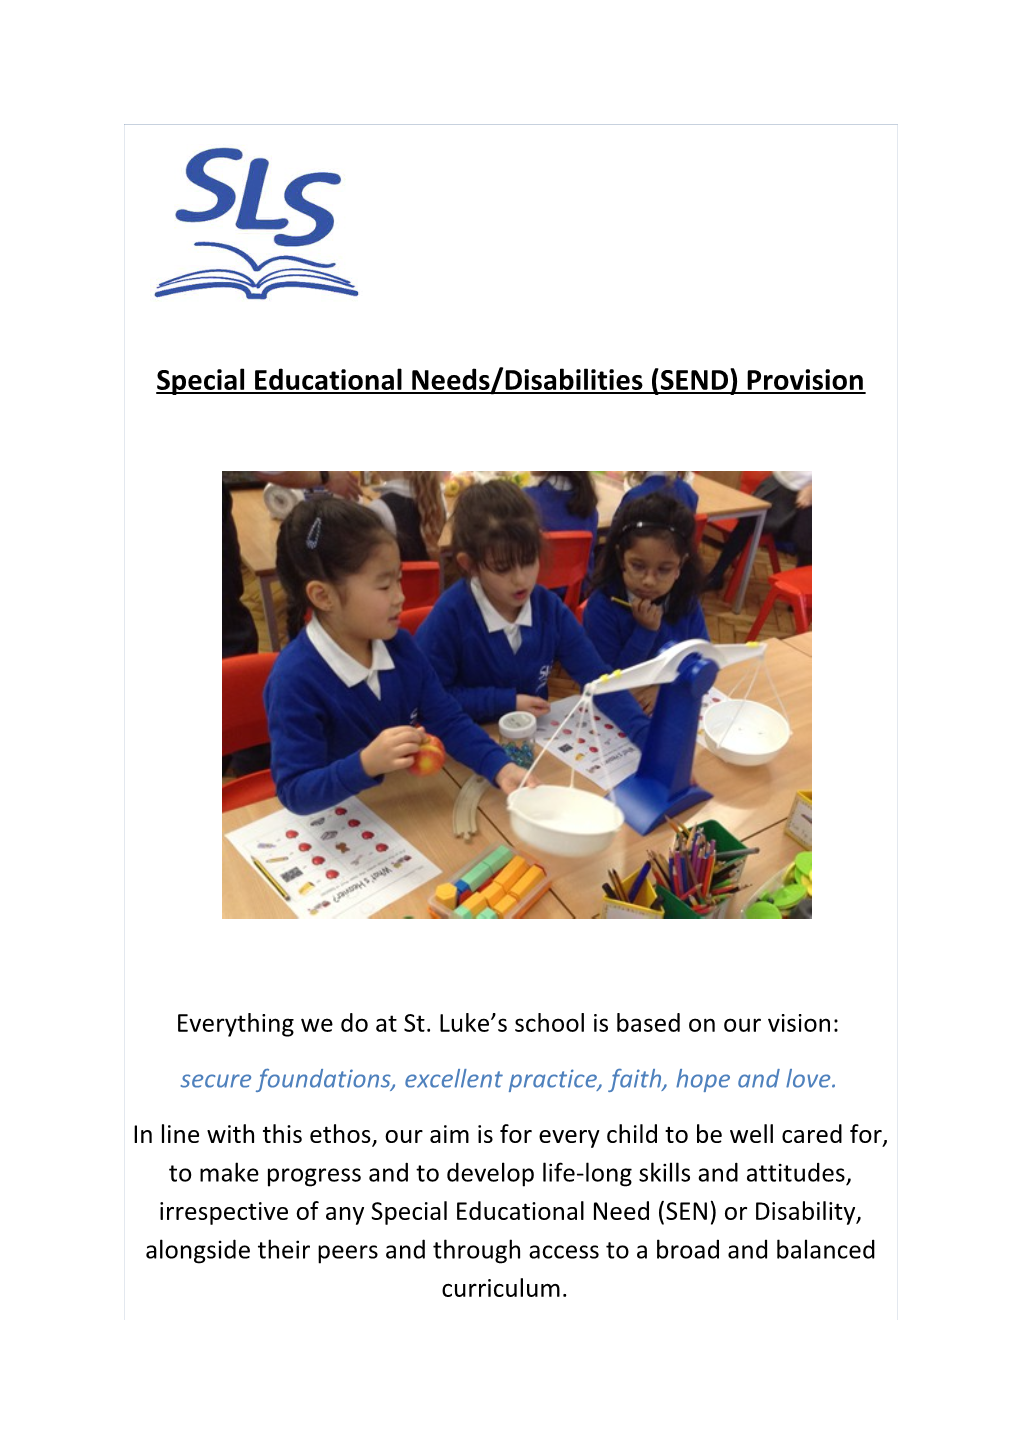 Special Educational Needs/Disabilities (SEND) Provision